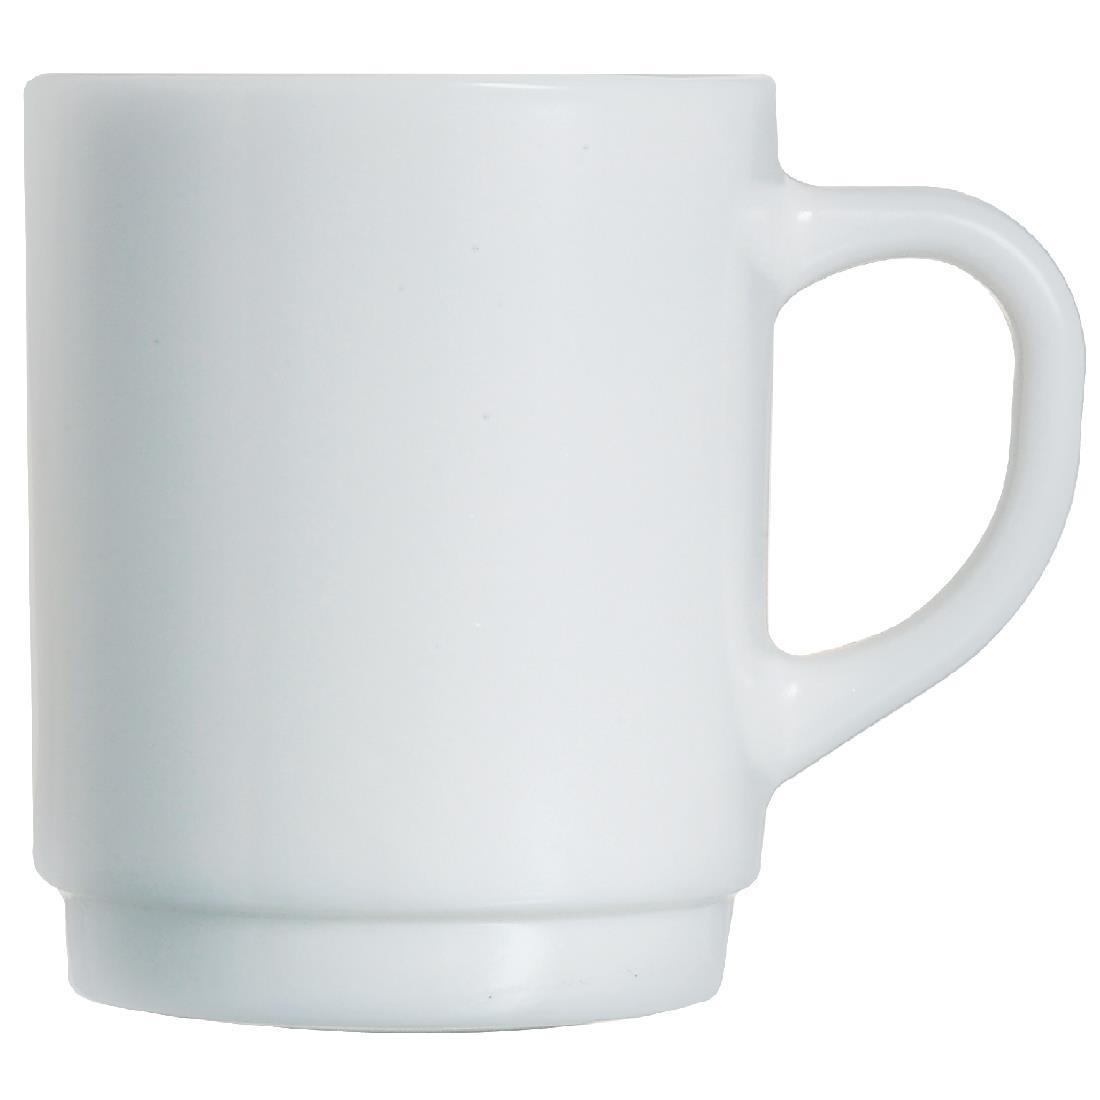 Arcoroc Opal Stackable Mugs 290ml (Pack of 6) - DP076  - 1